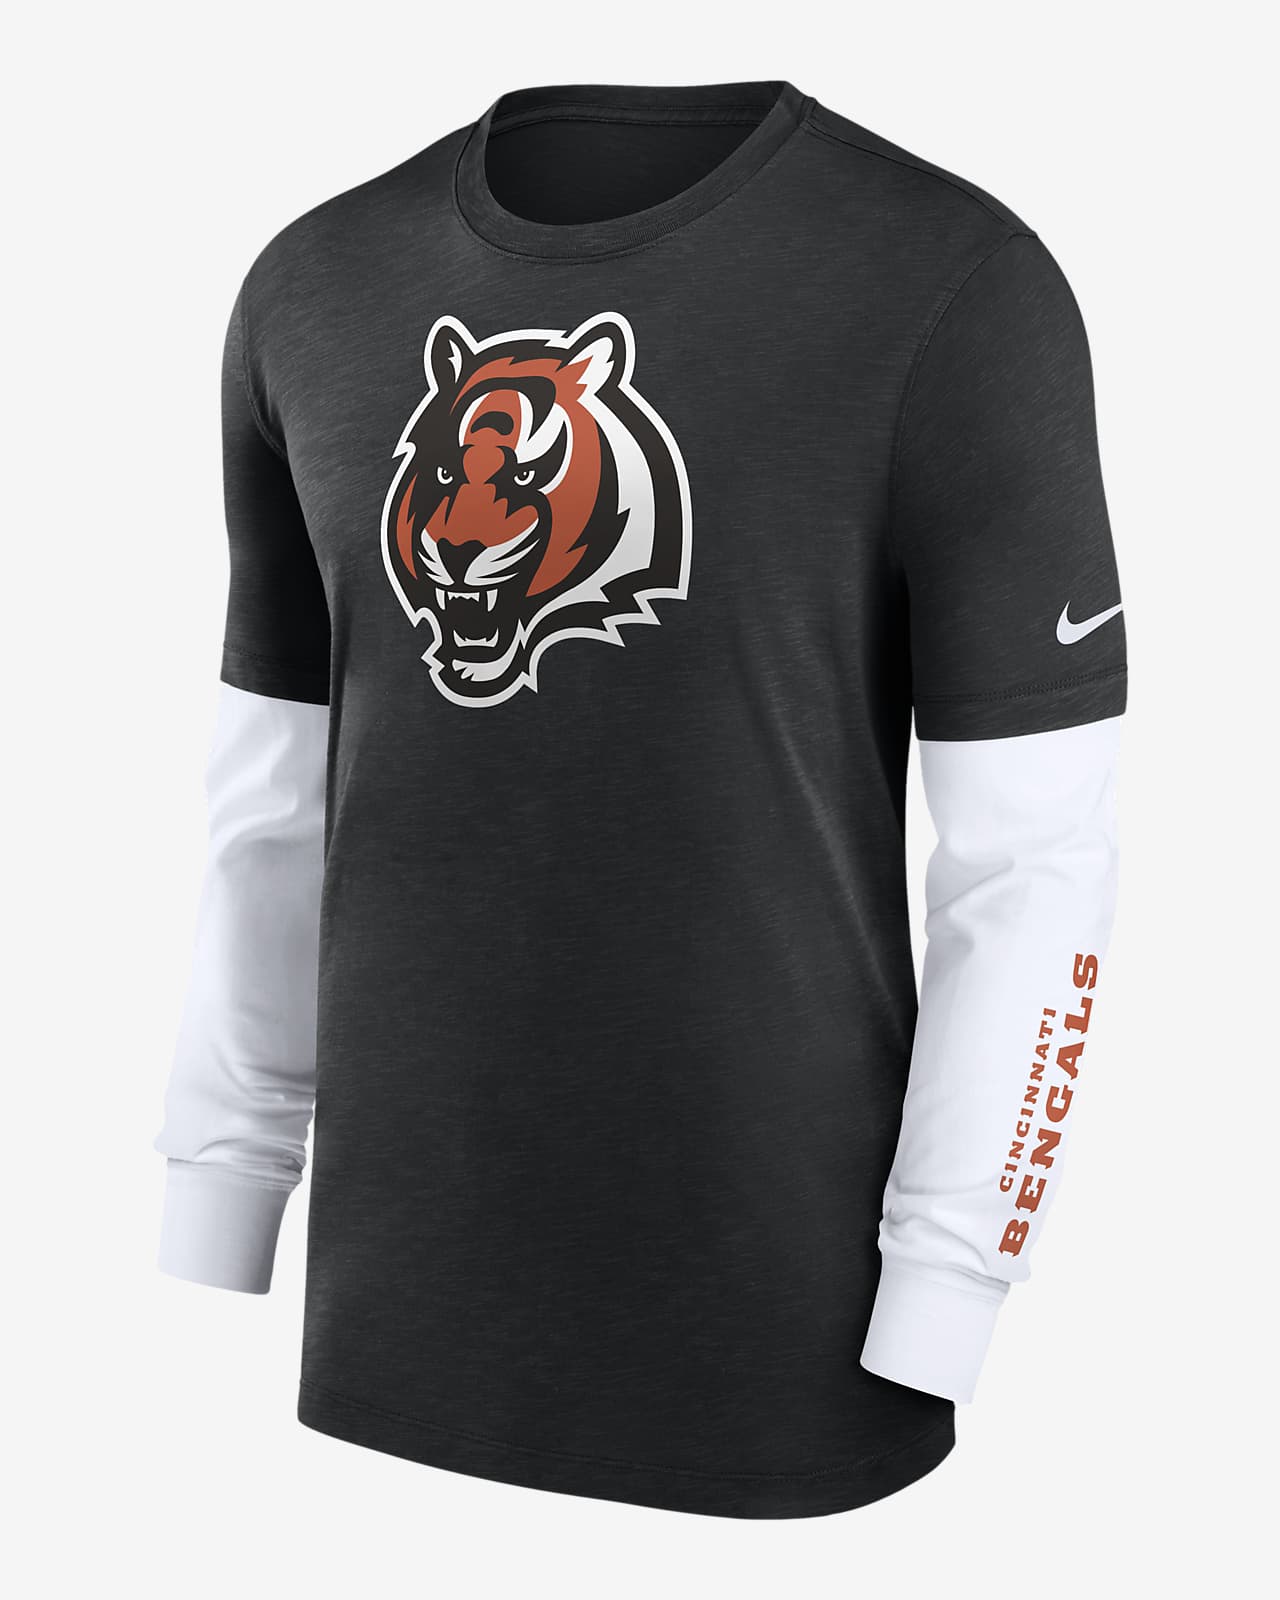 Cincinnati Bengals Nike Men's NFL Long-Sleeve Top in Black, Size: Small | 00BY99PH9A-05G